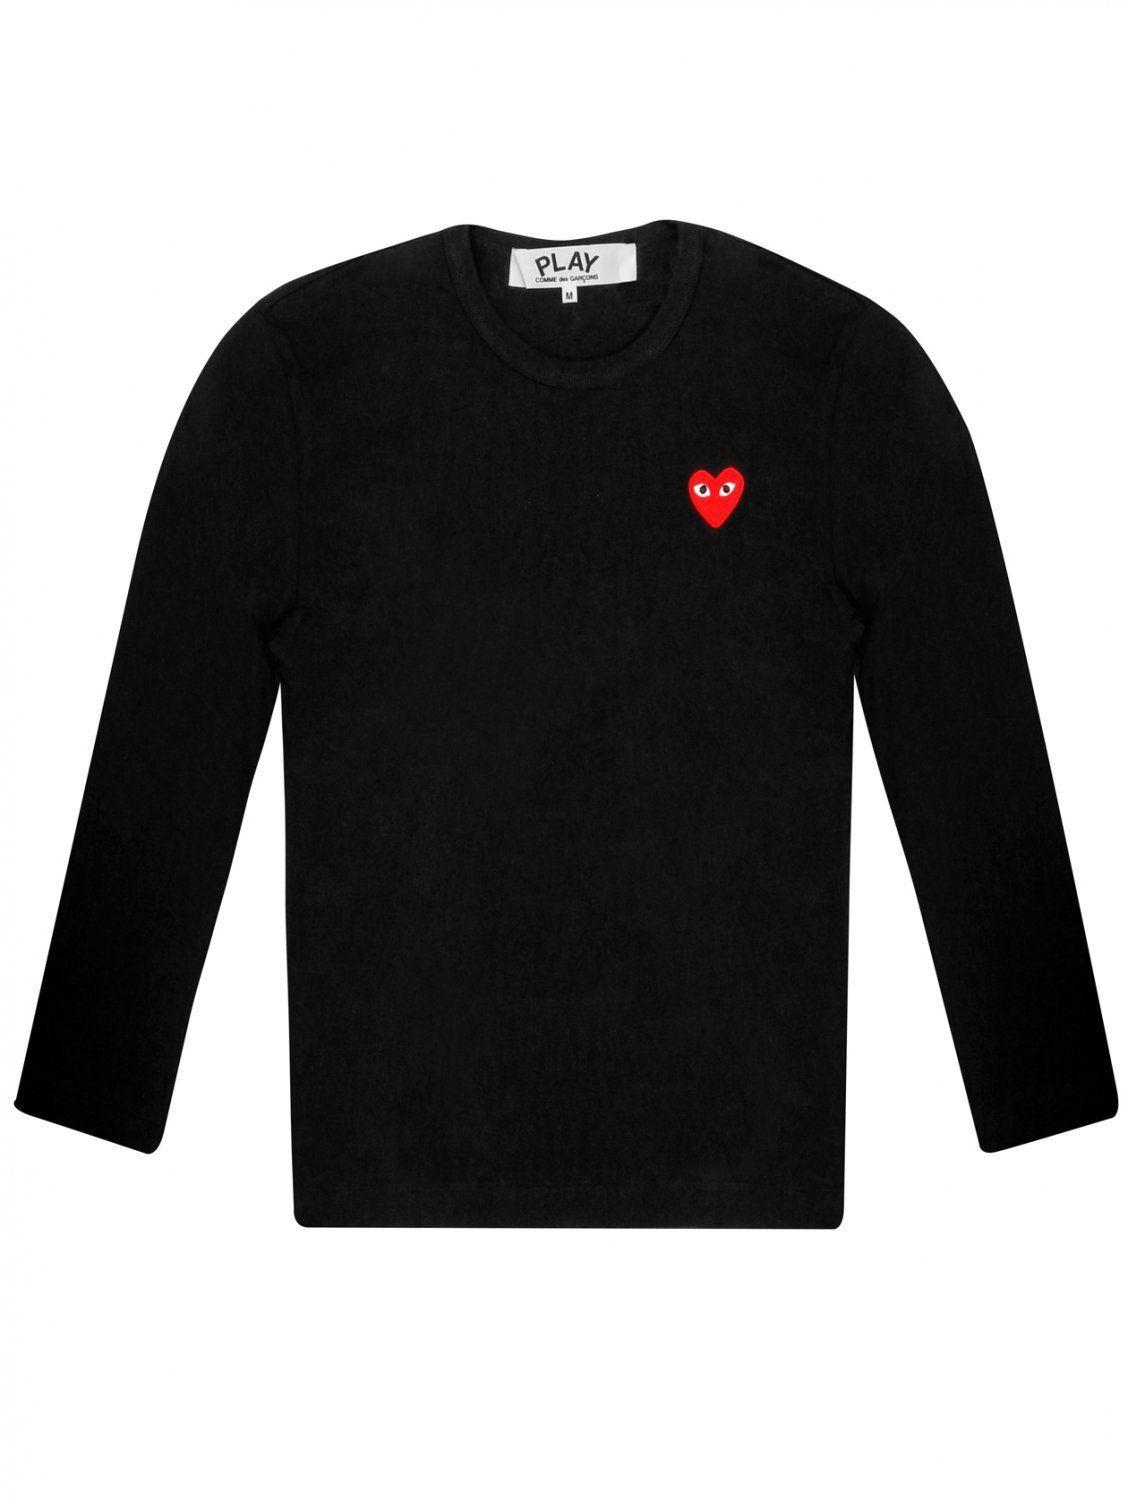 Black and Red Heart Logo - Comme Des Garcons Clothing | PLAY Ladies L/S Red Heart Logo T Shirt ...